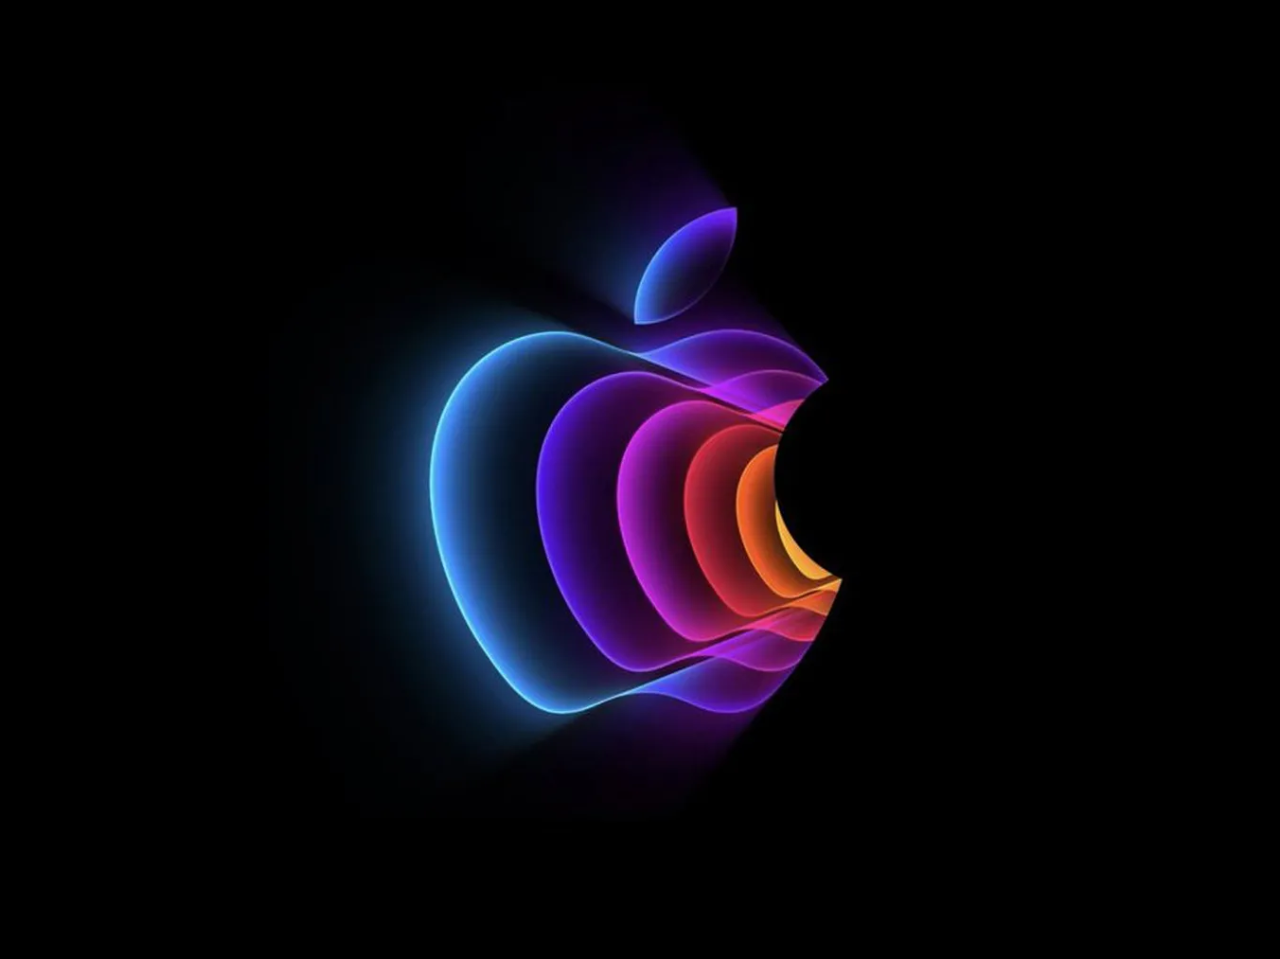 What to expect and how to watch Apple’s March 8th ‘Peek Performance’ Event